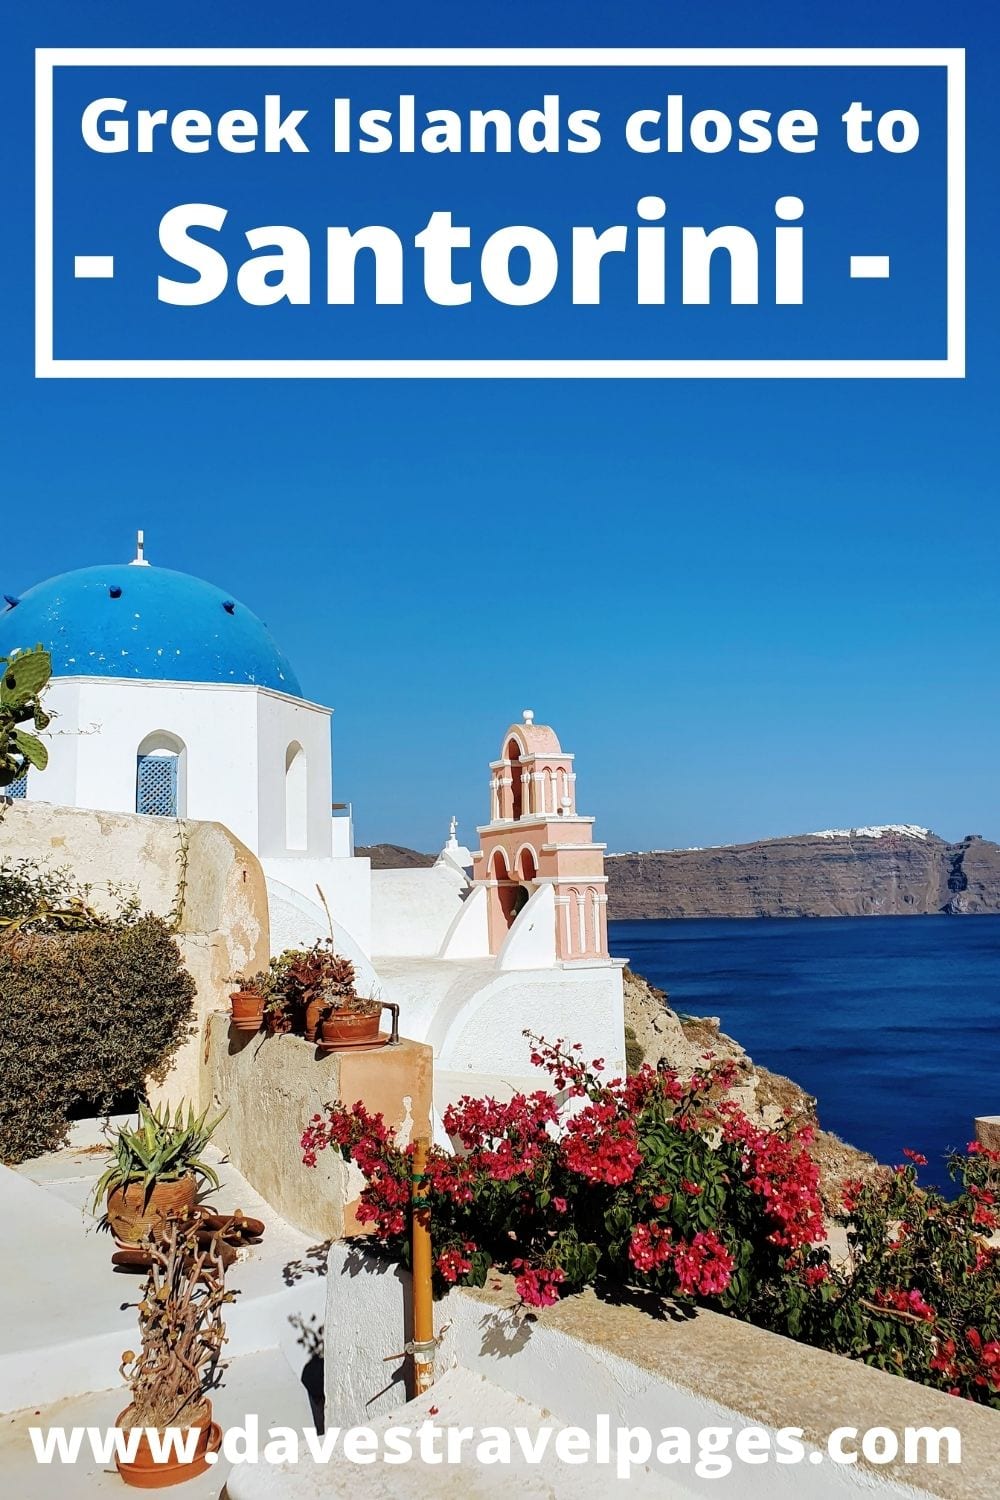 How to get to the Greek islands near Santorini